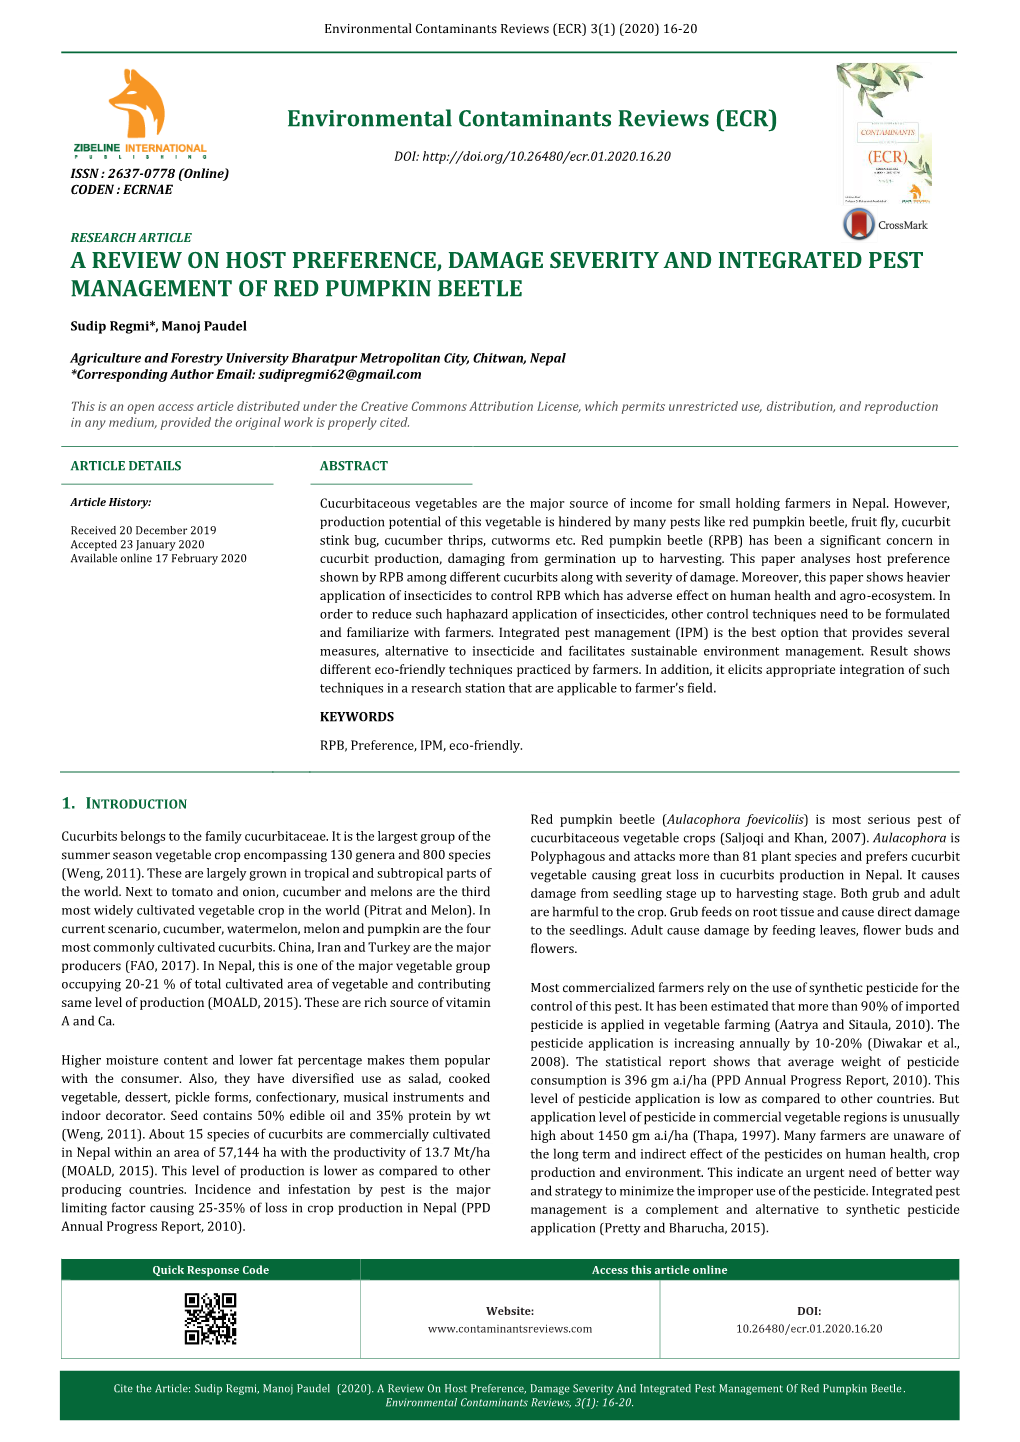 A Review on Host Preference, Damage Severity and Integrated Pest Management of Red Pumpkin Beetle